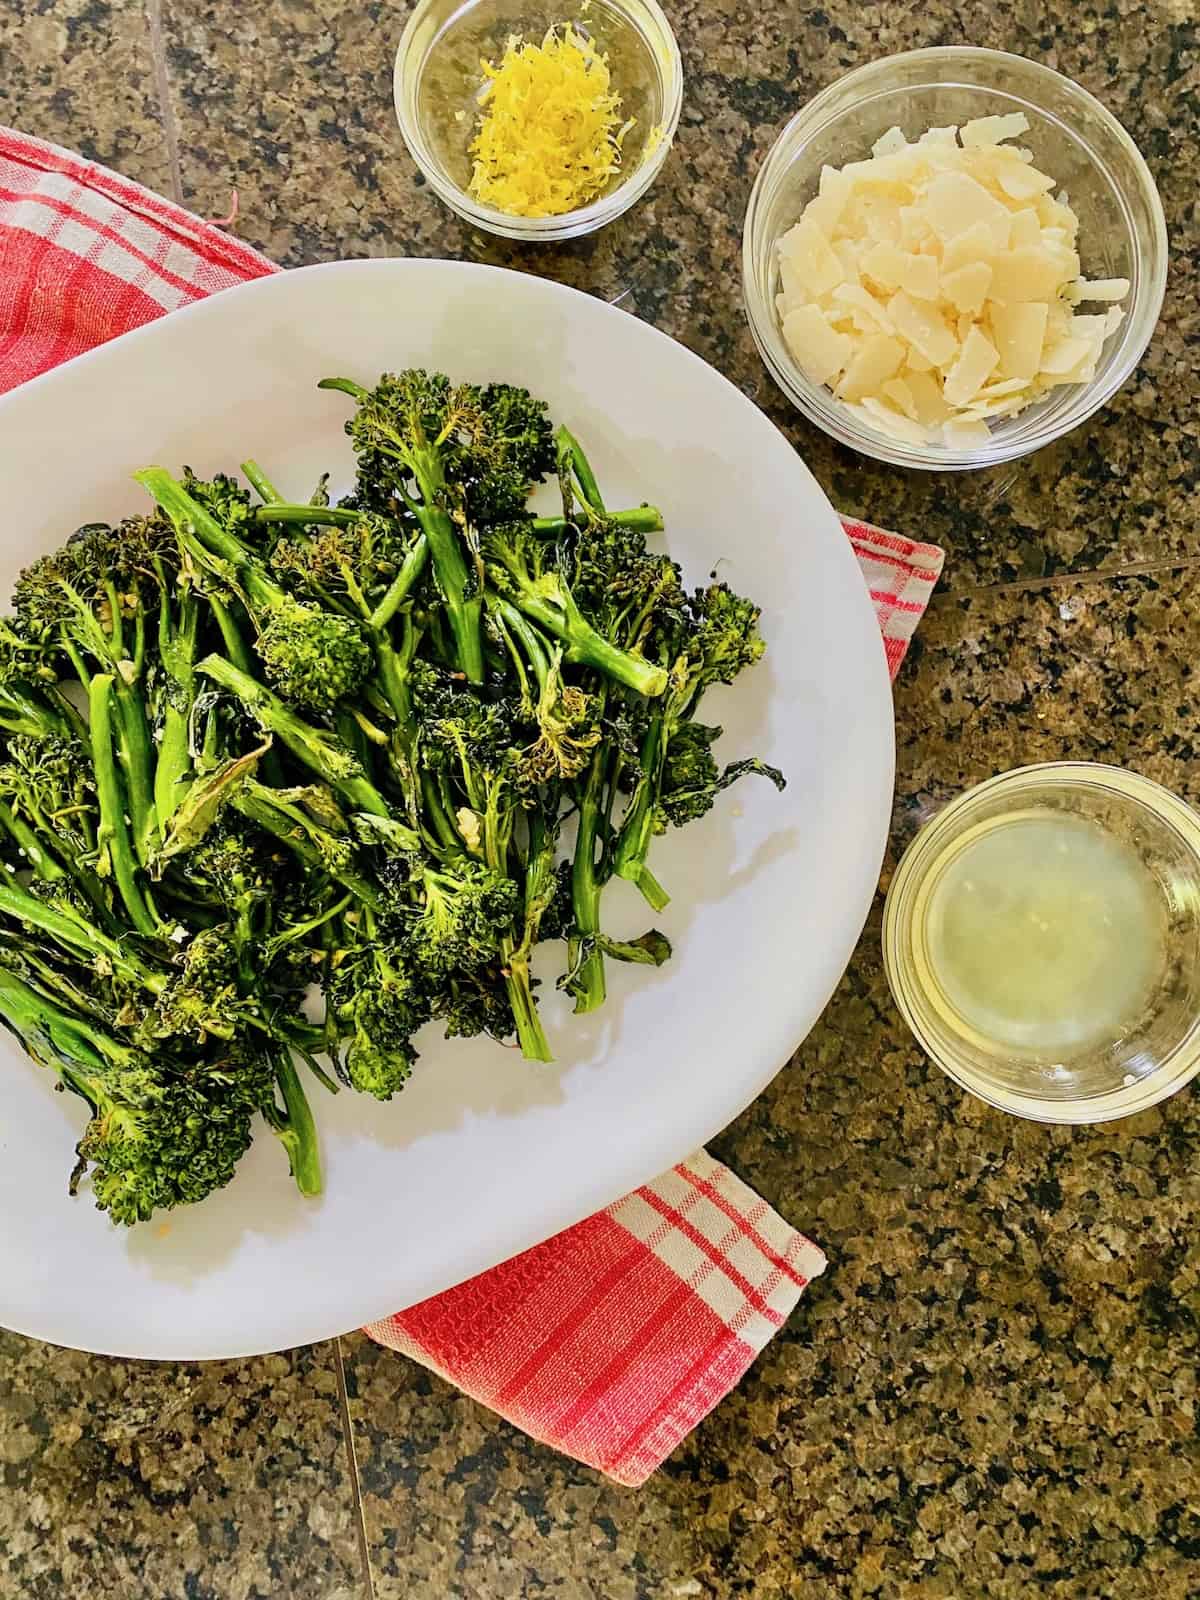 broccolini plated with bowls of shaved parmesan, lemon juice, and lemon zest on the side.